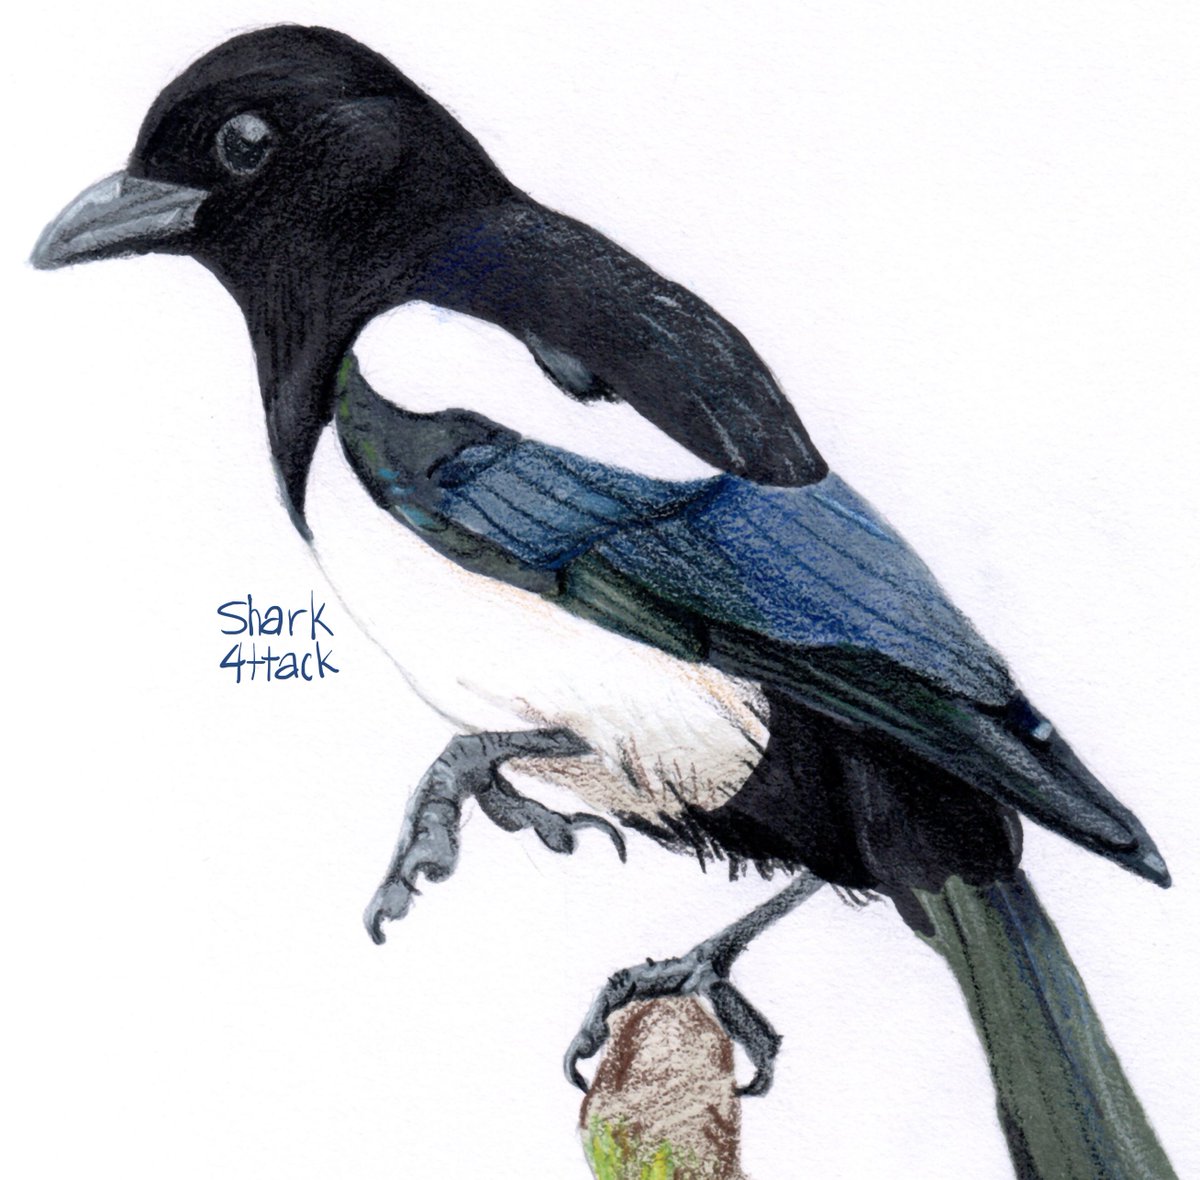 another older bird drawing i scanned: eurasian magpie, drawn with cheap alcohol markers and prismacolor pencils. i really like this technique, way faster and easier in my opinion

follow me and write a reply if you want to be moots btw : D

#arttwt #artmoots